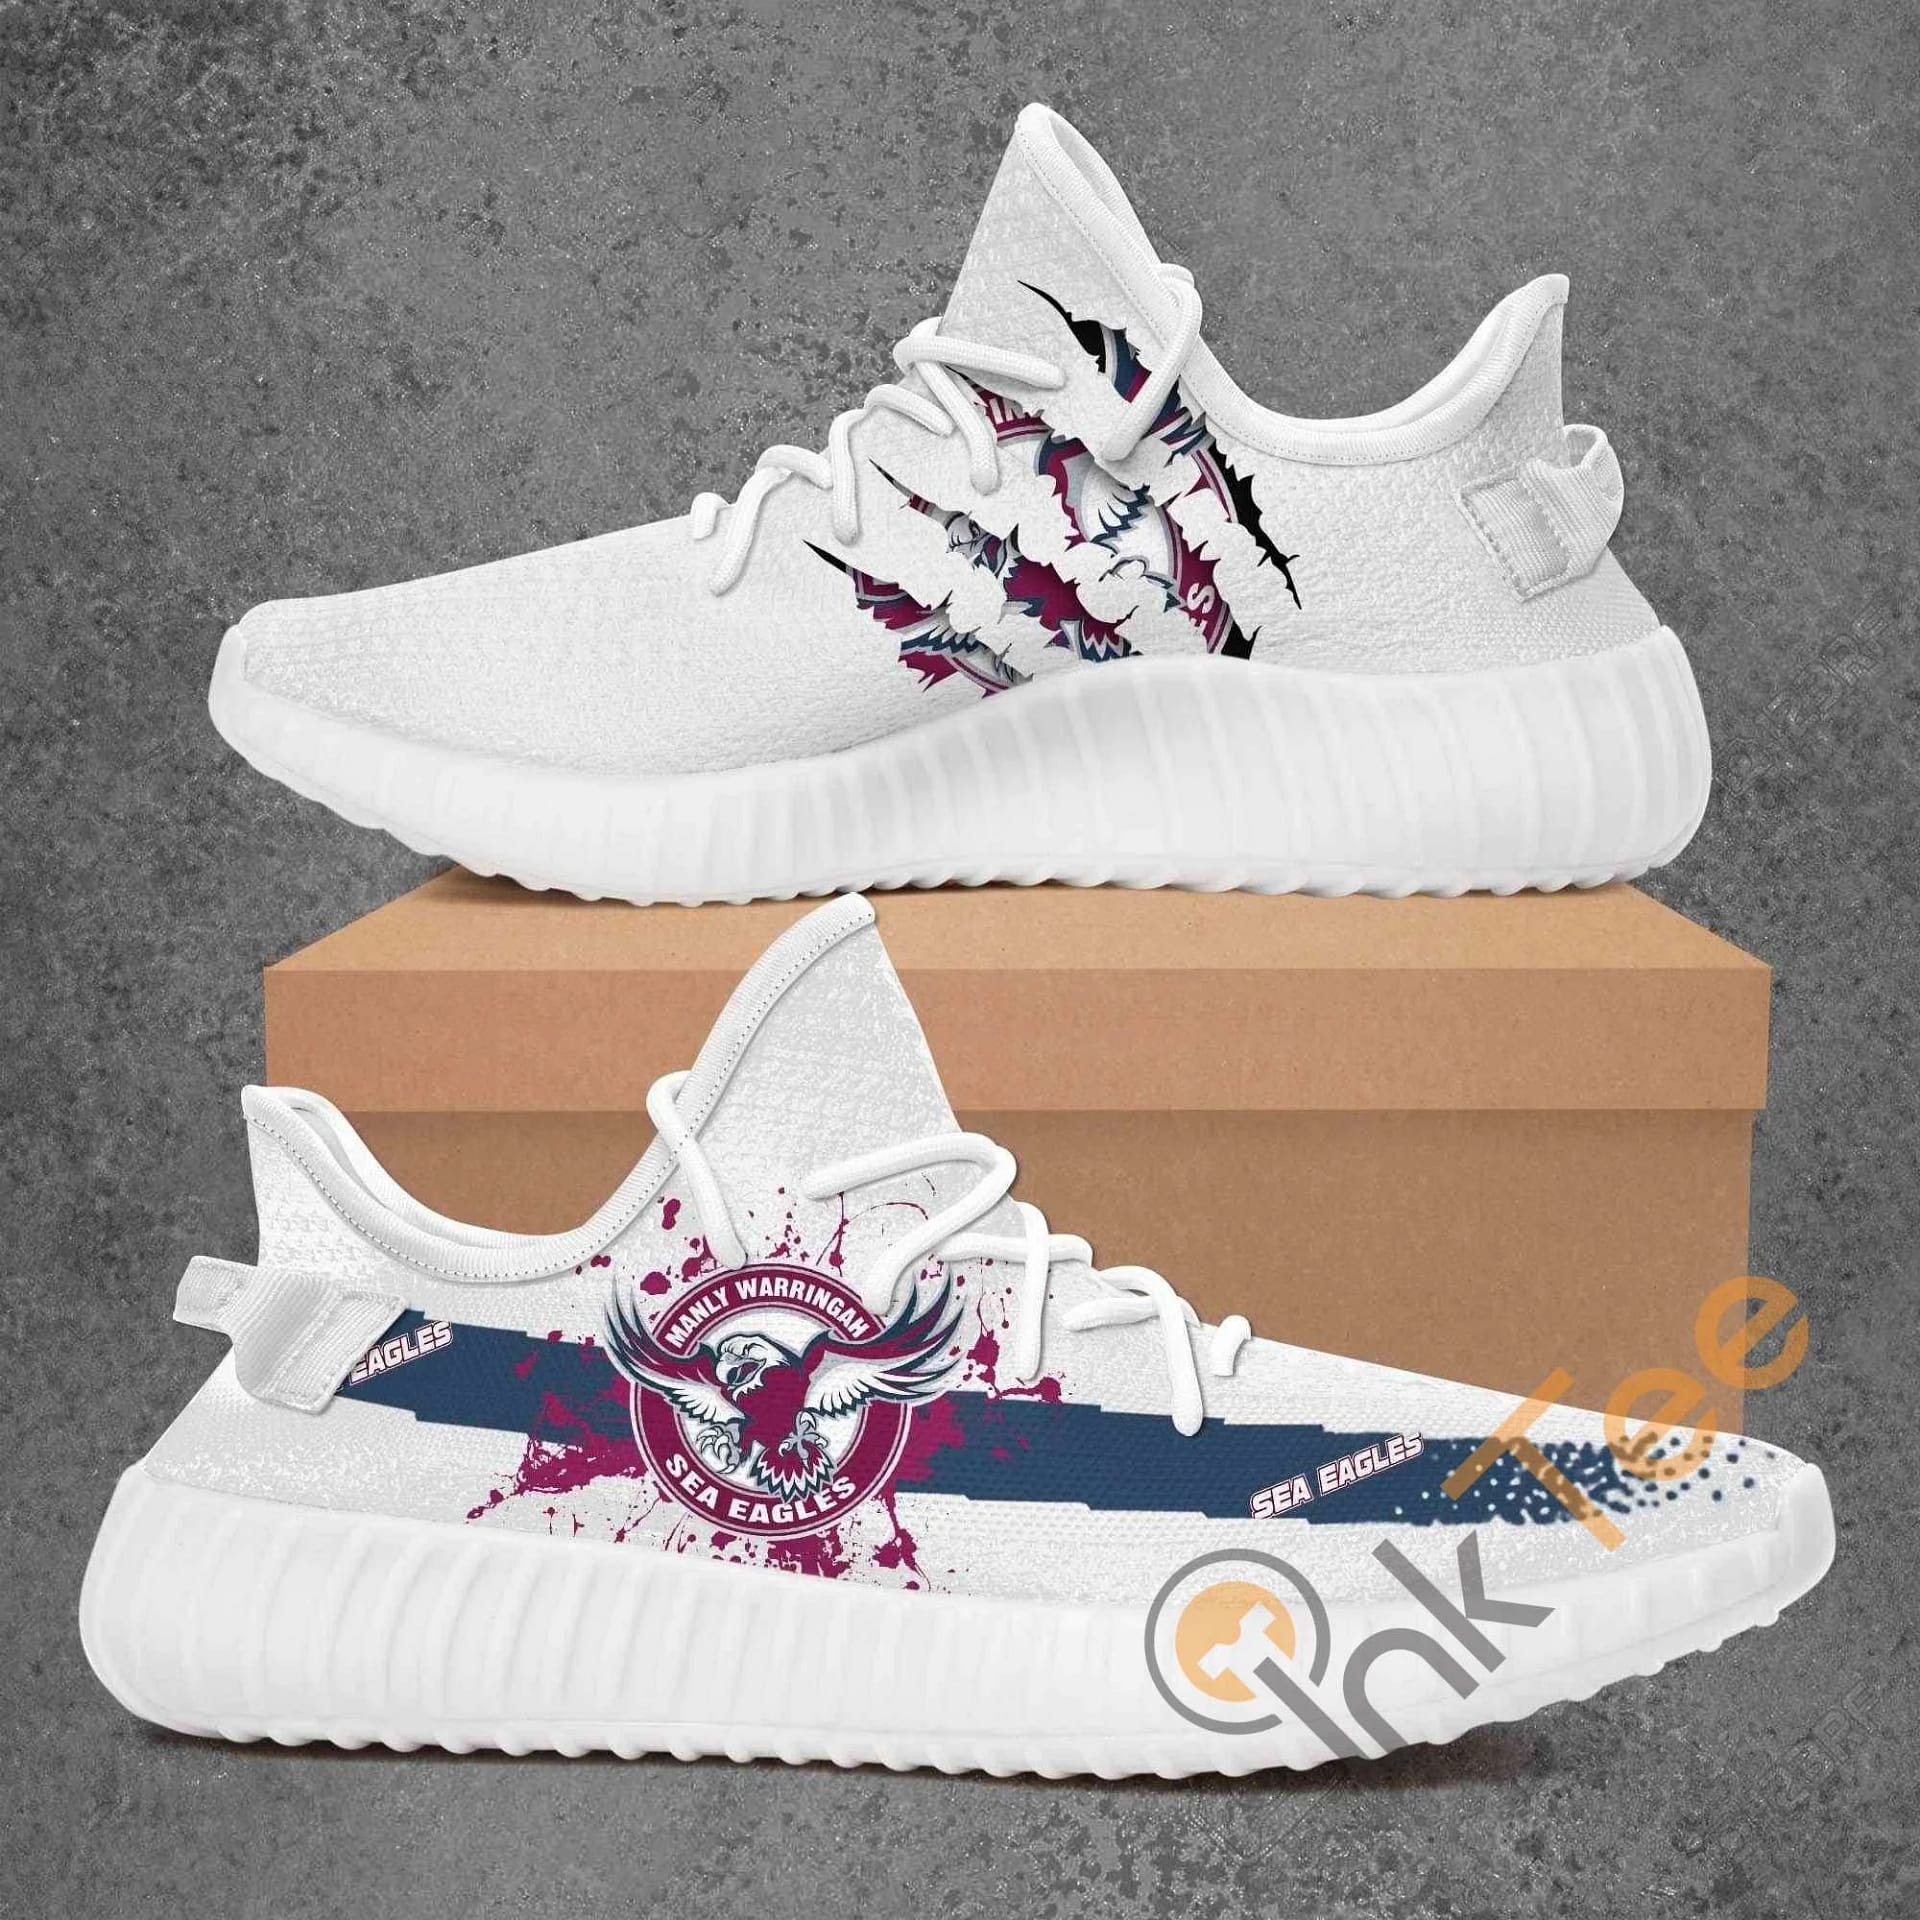 Manly Sea Eagles Adidas Amazon Best Selling Yeezy Boost